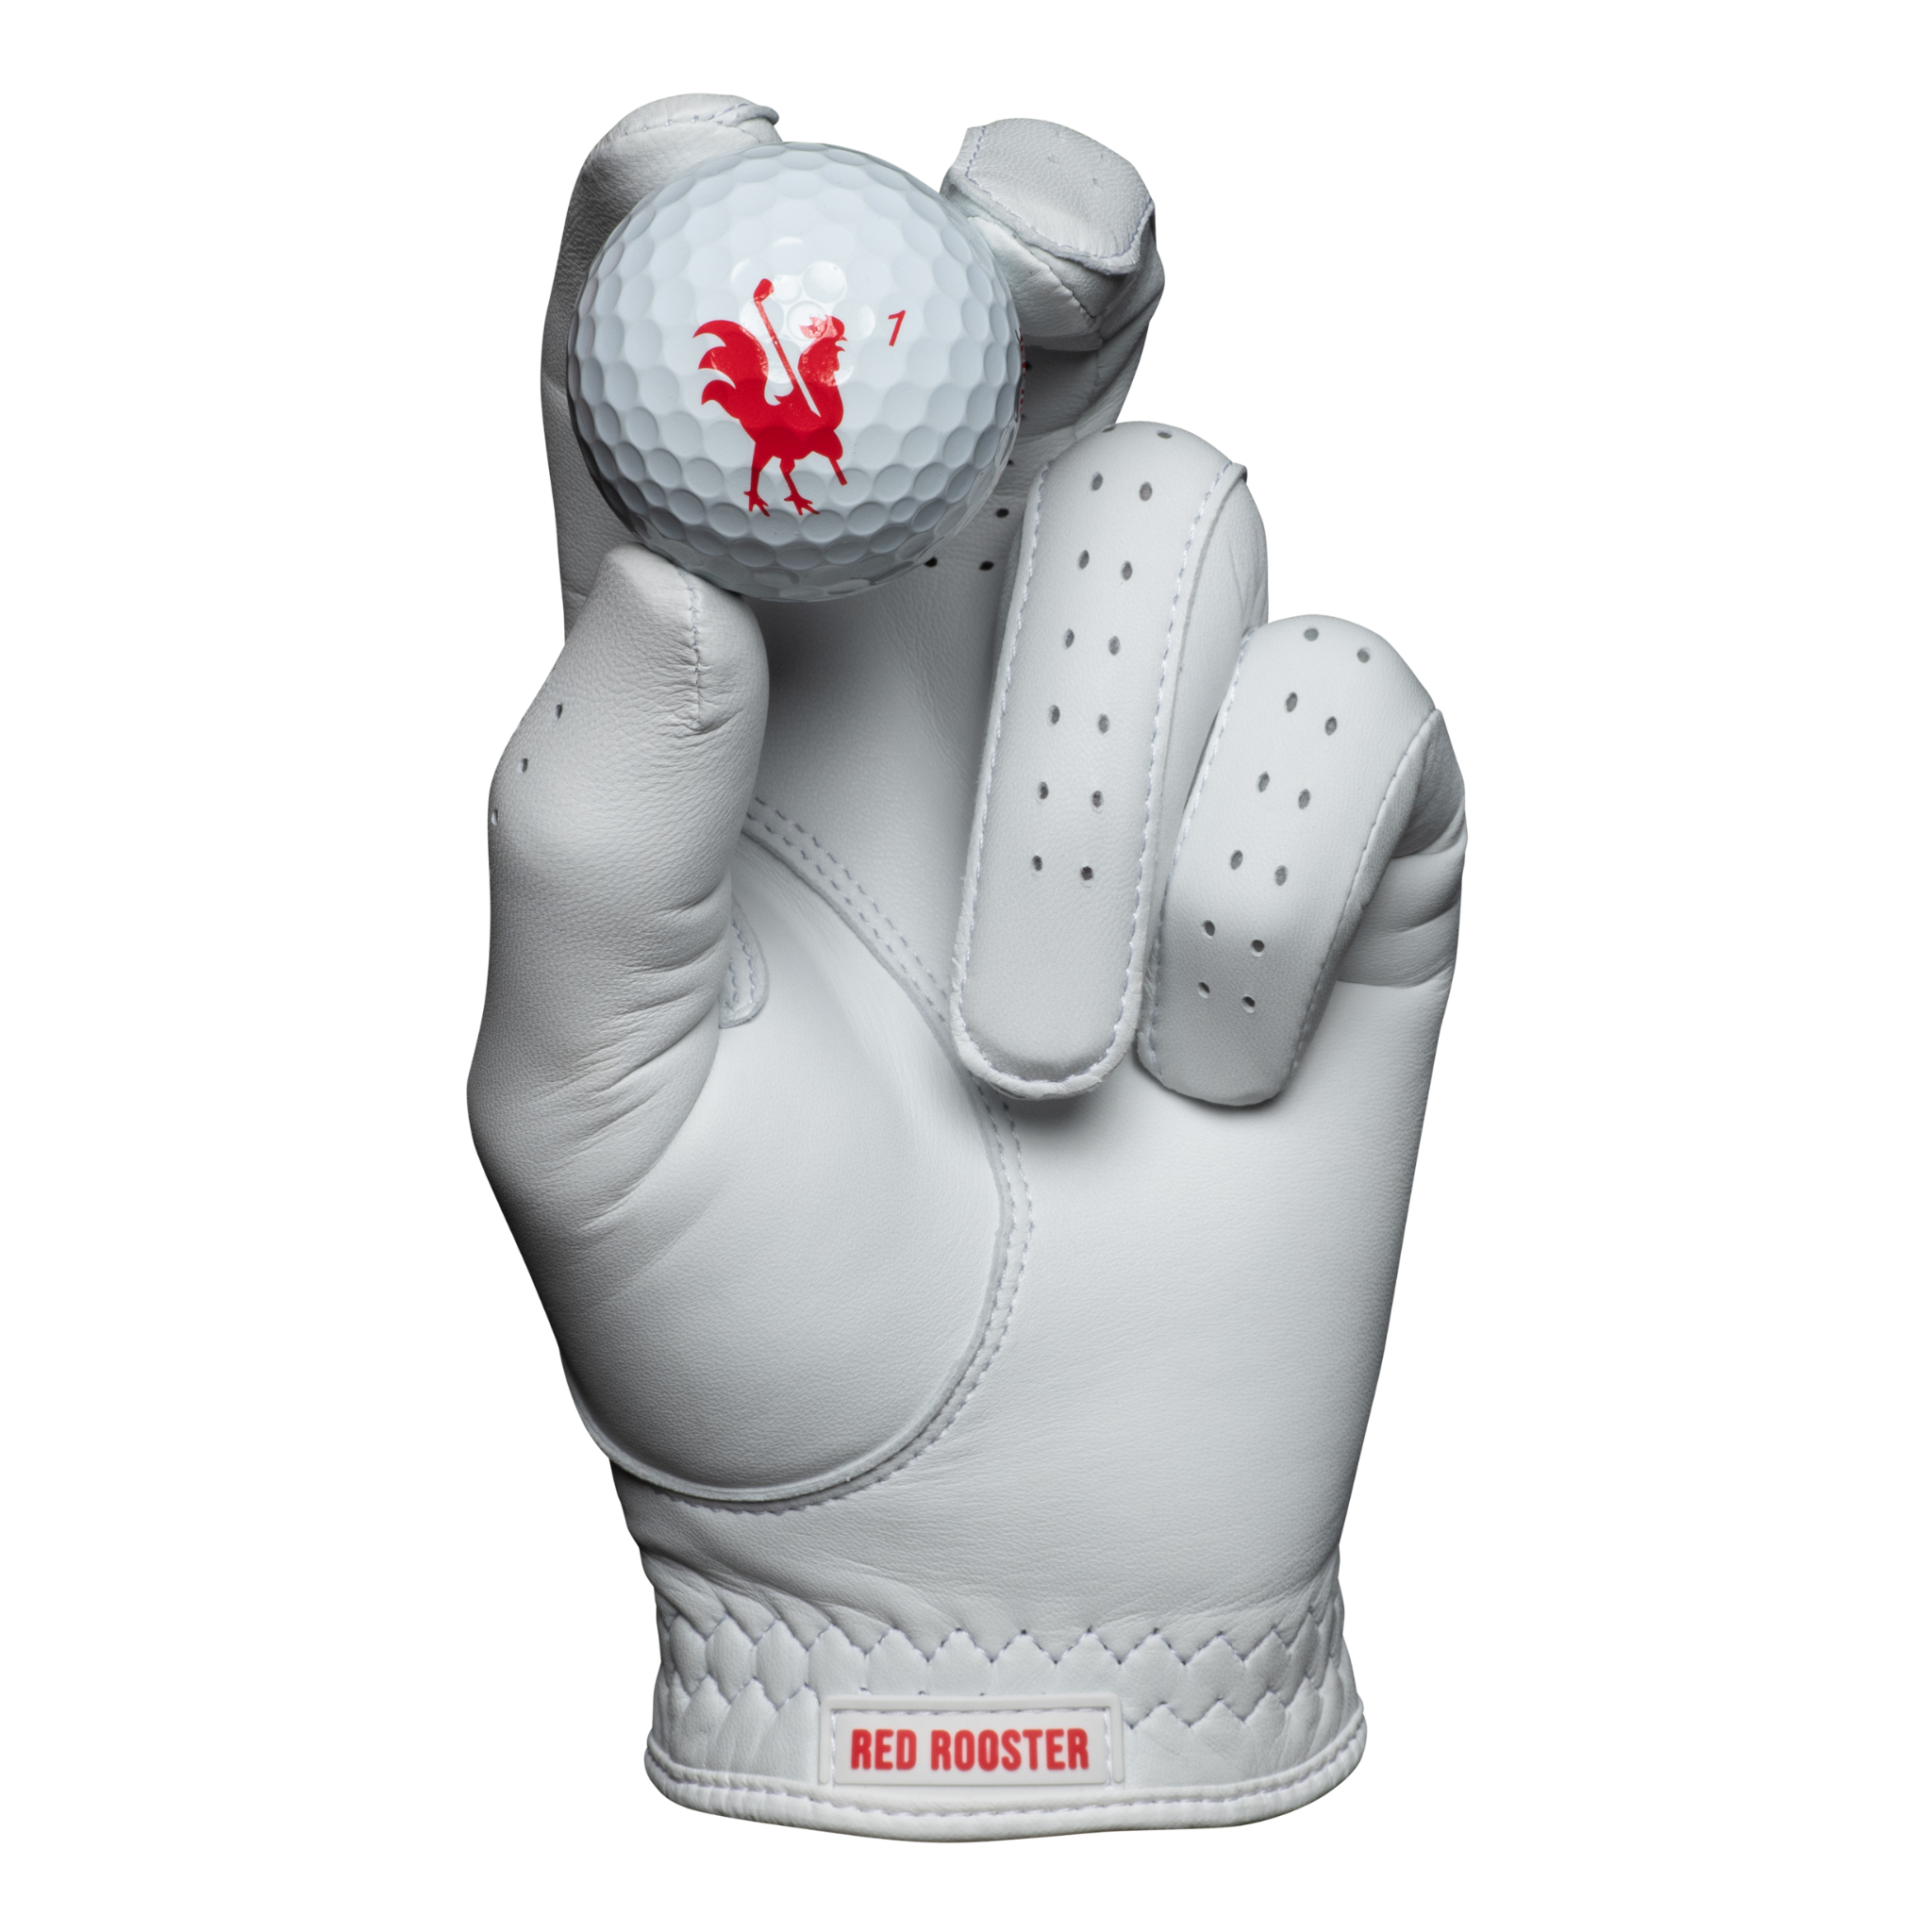 The Sussex golf glove holding a golf club